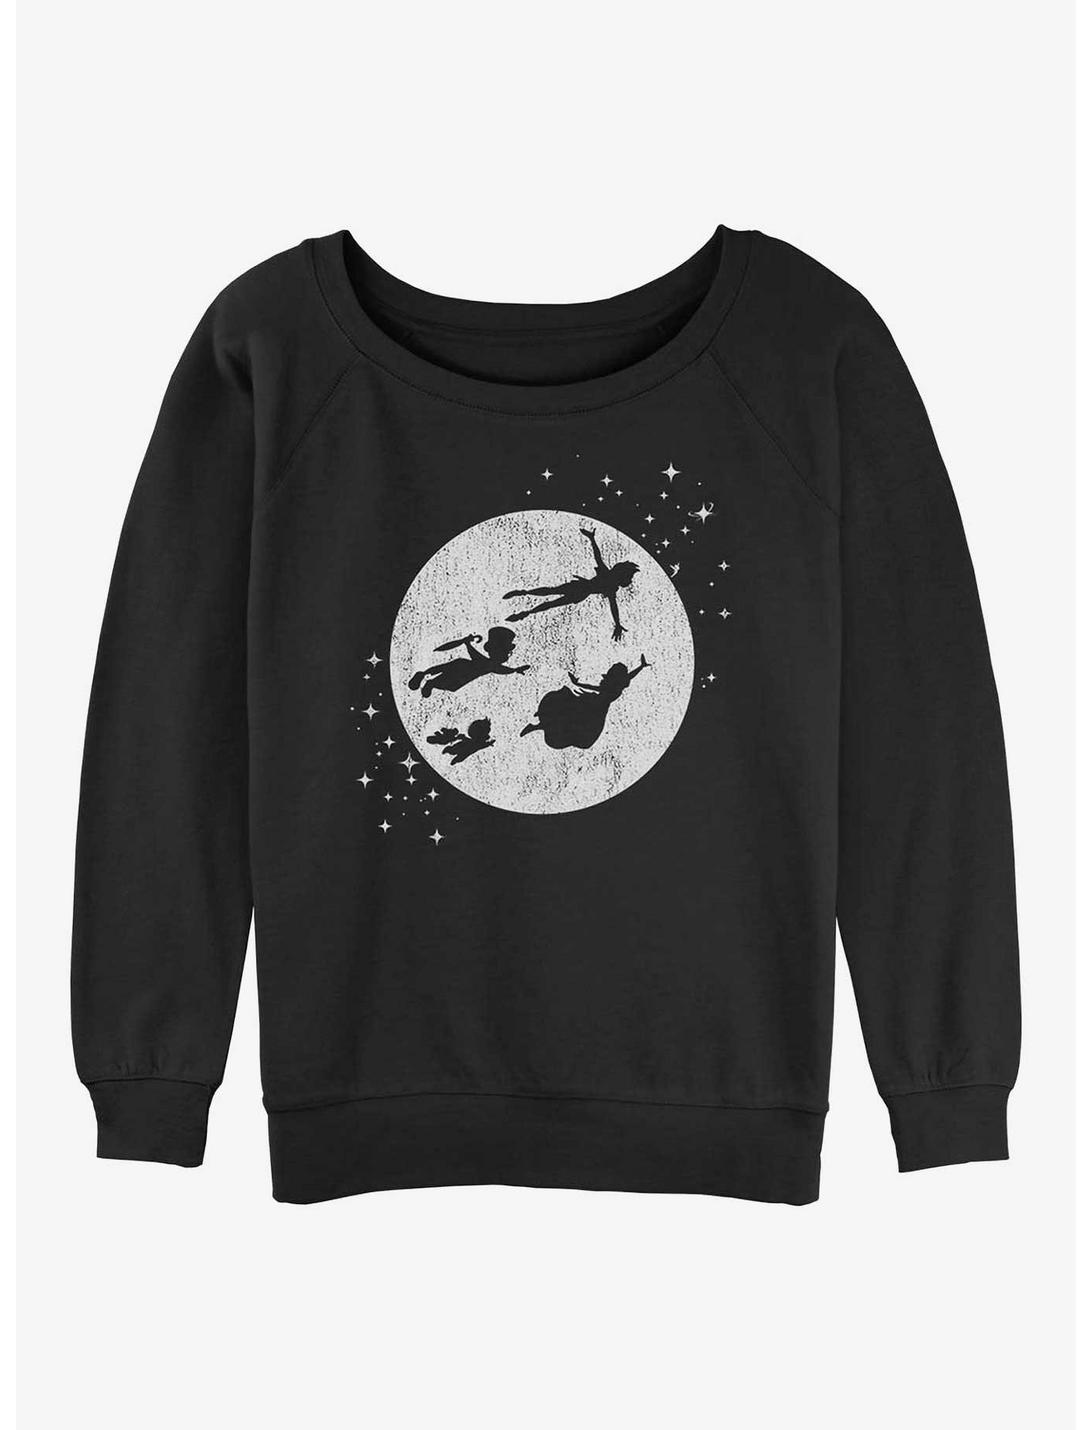 Disney Tinker Bell Second Star To The Right Womens Slouchy Sweatshirt, BLACK, hi-res